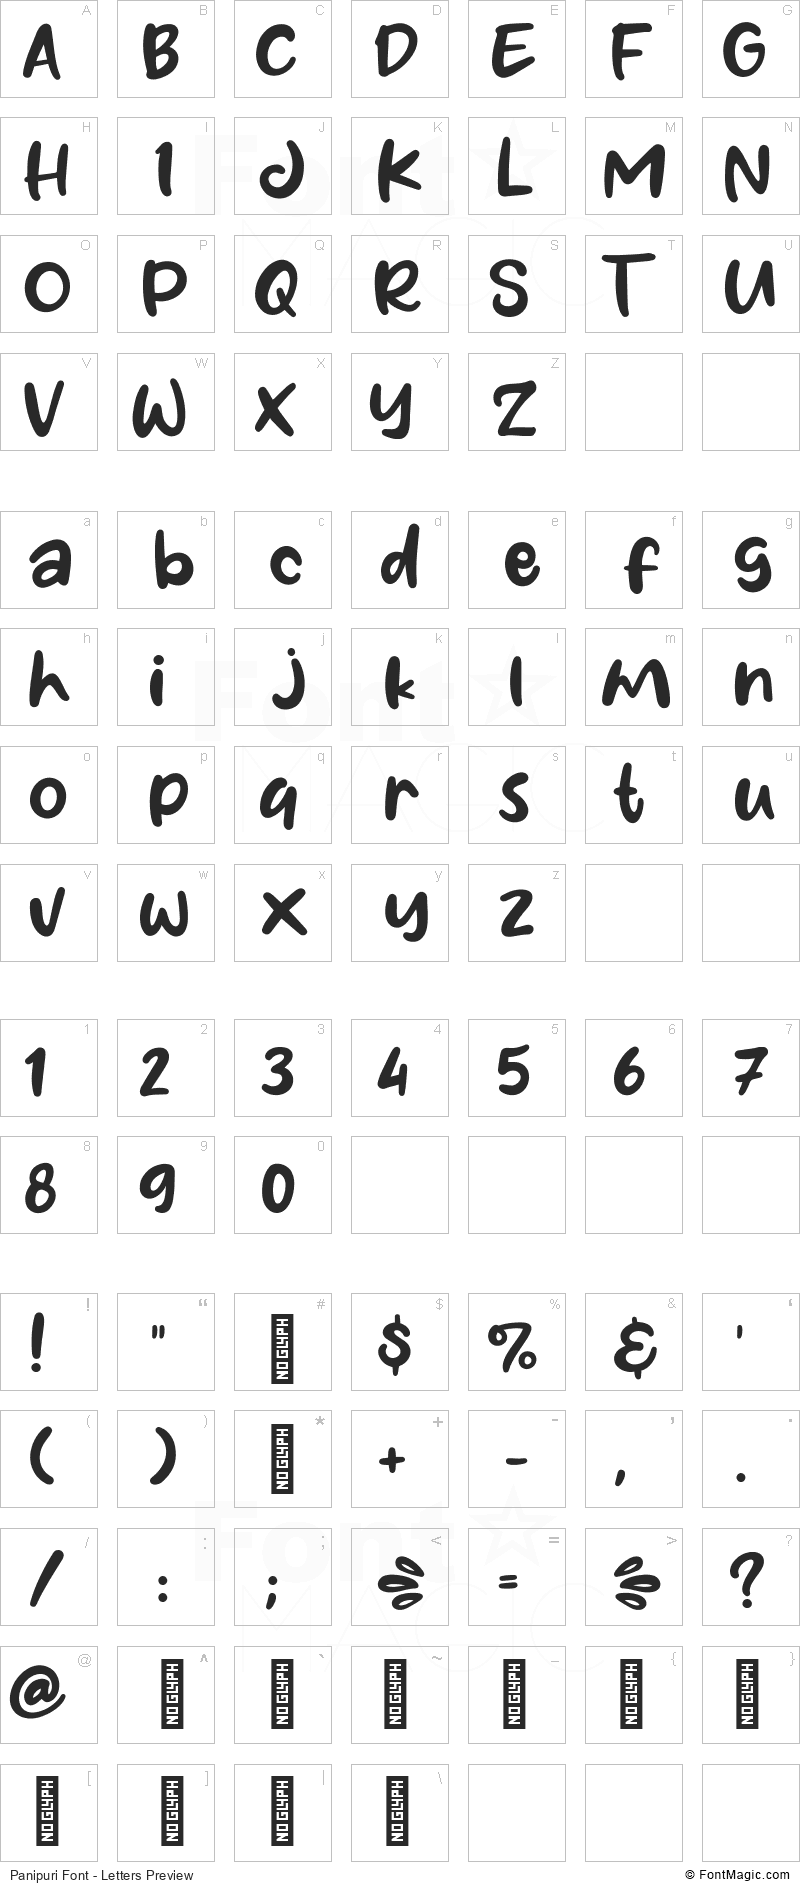 Panipuri Font - All Latters Preview Chart